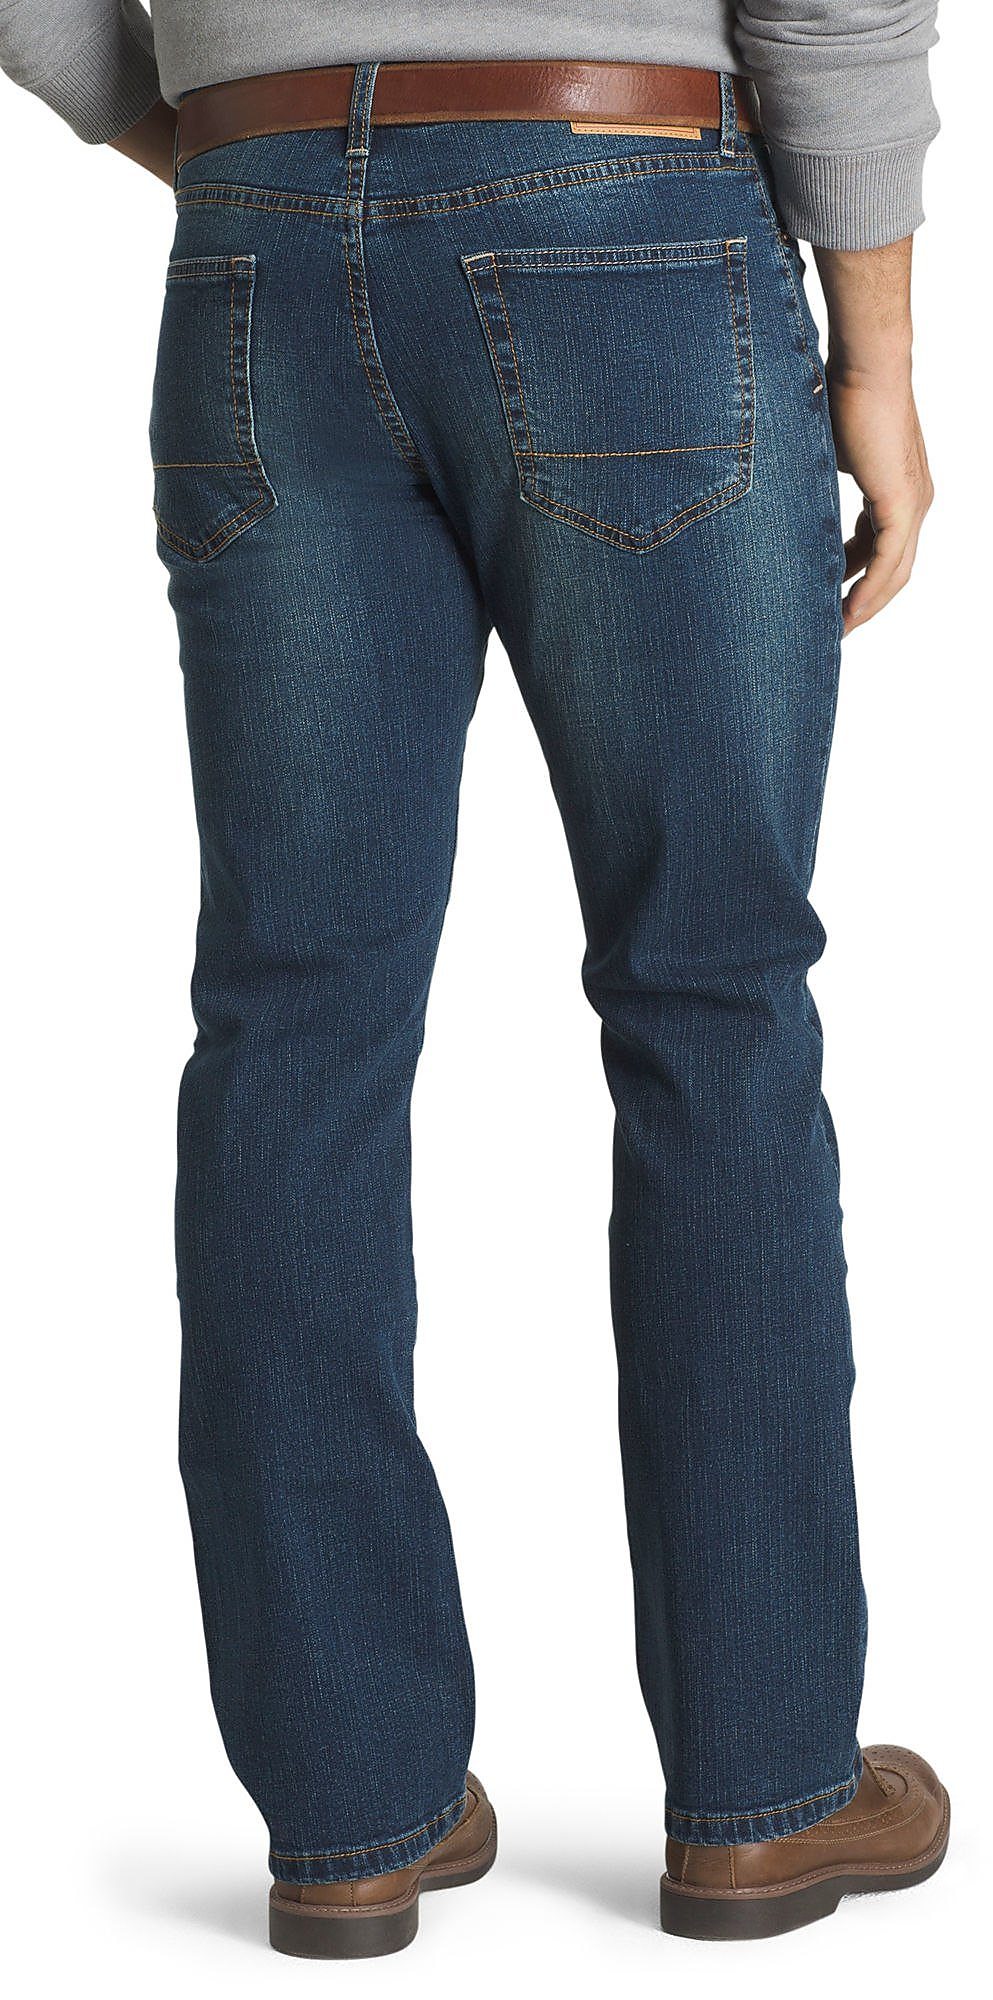 IZOD Mens Comfort Stretch Relaxed Fit Jeans | eBay